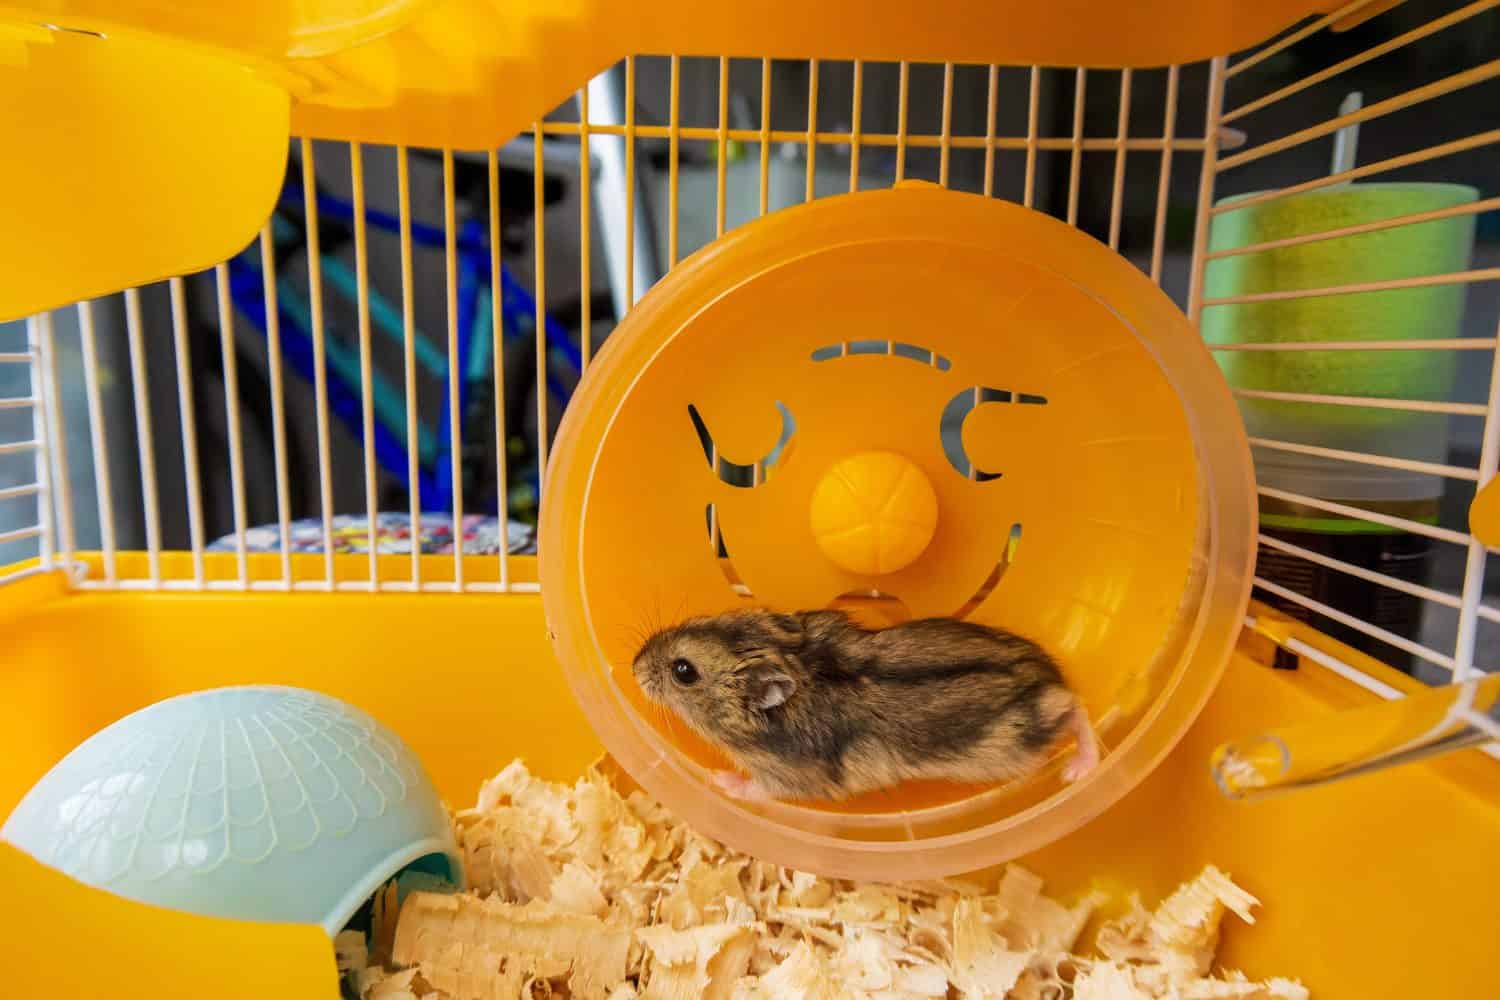 a Dzungarian hamster running in a yellow wheel in a cage. High quality photos